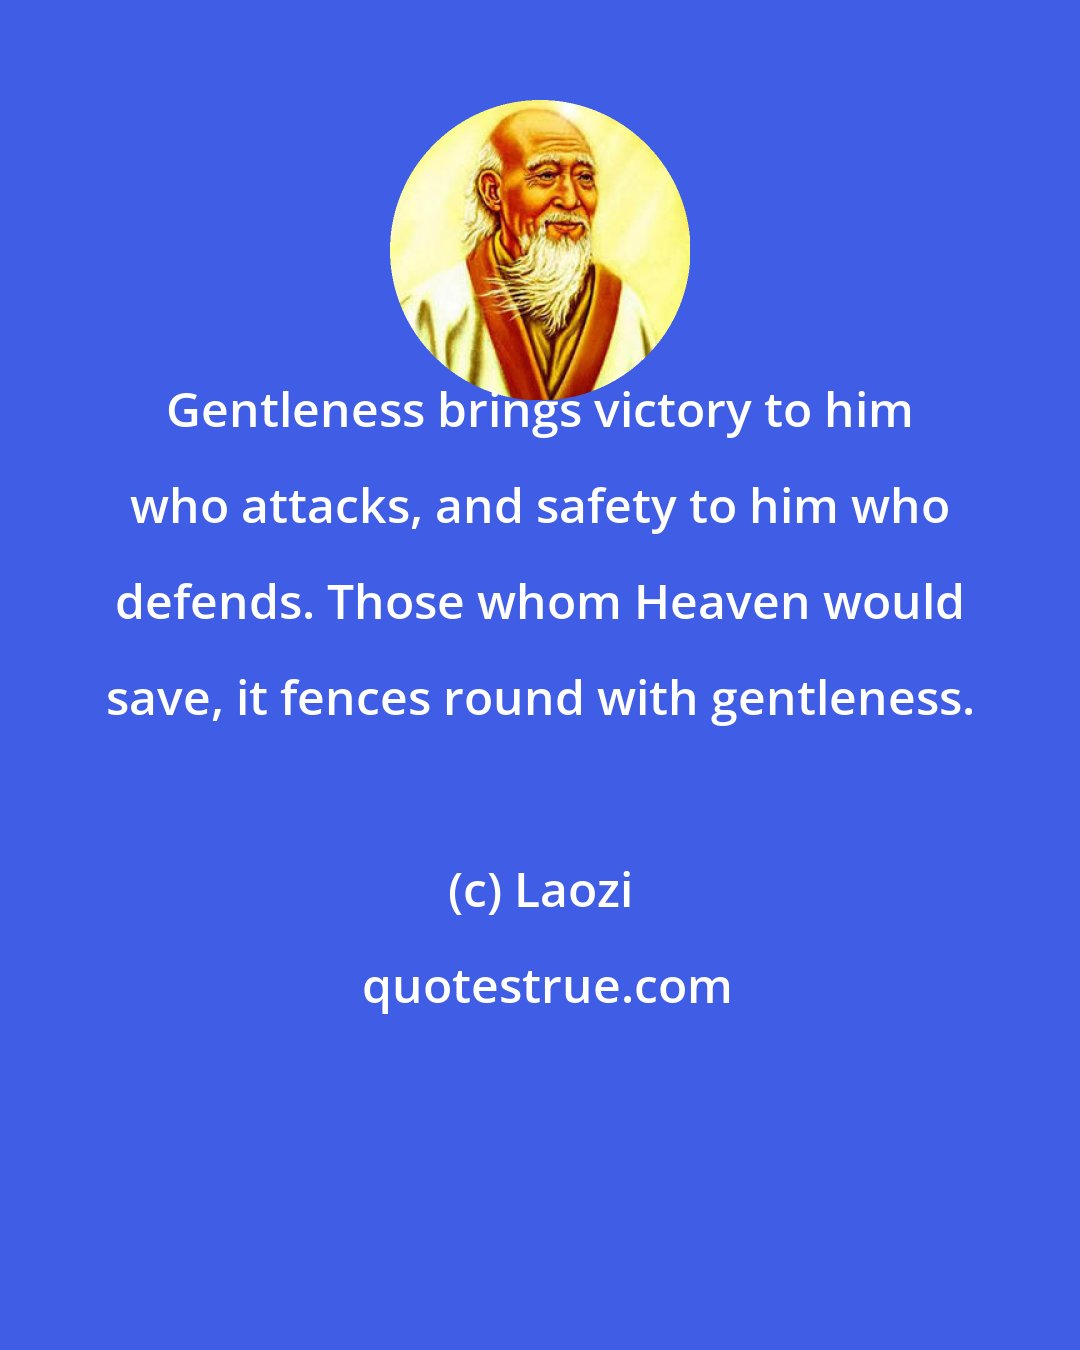 Laozi: Gentleness brings victory to him who attacks, and safety to him who defends. Those whom Heaven would save, it fences round with gentleness.